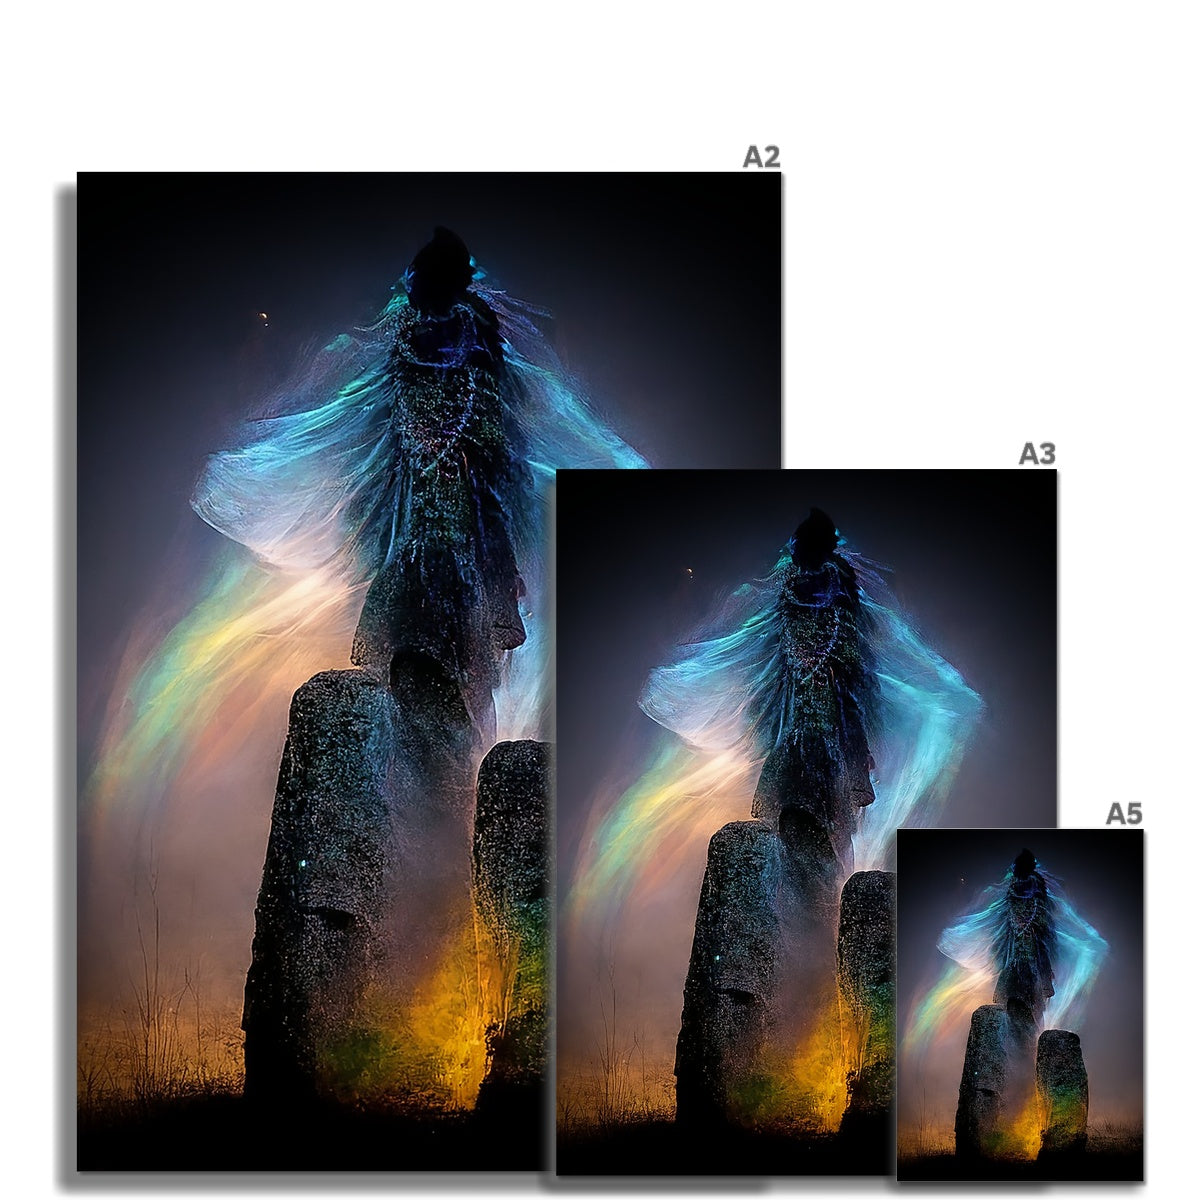 Shaman and Standing Stones  Wall Art Poster